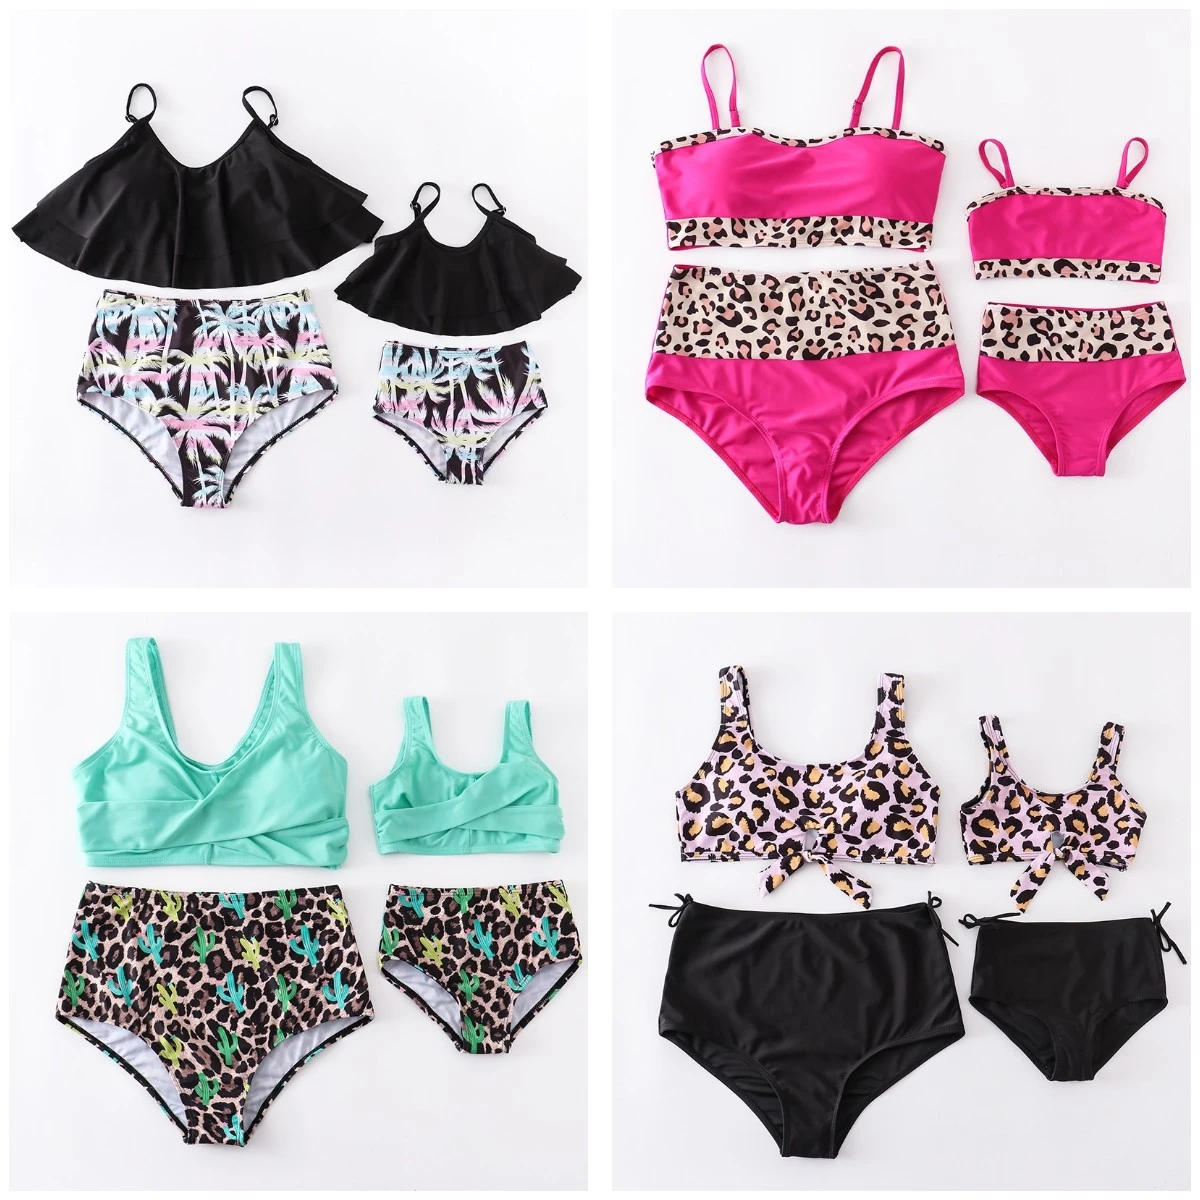 Girlymax Summer Baby Girls Children Clothes Mommy & Me Stripe Floral Leopard Swimsuit Bikini Boutique Set Kids Clothing